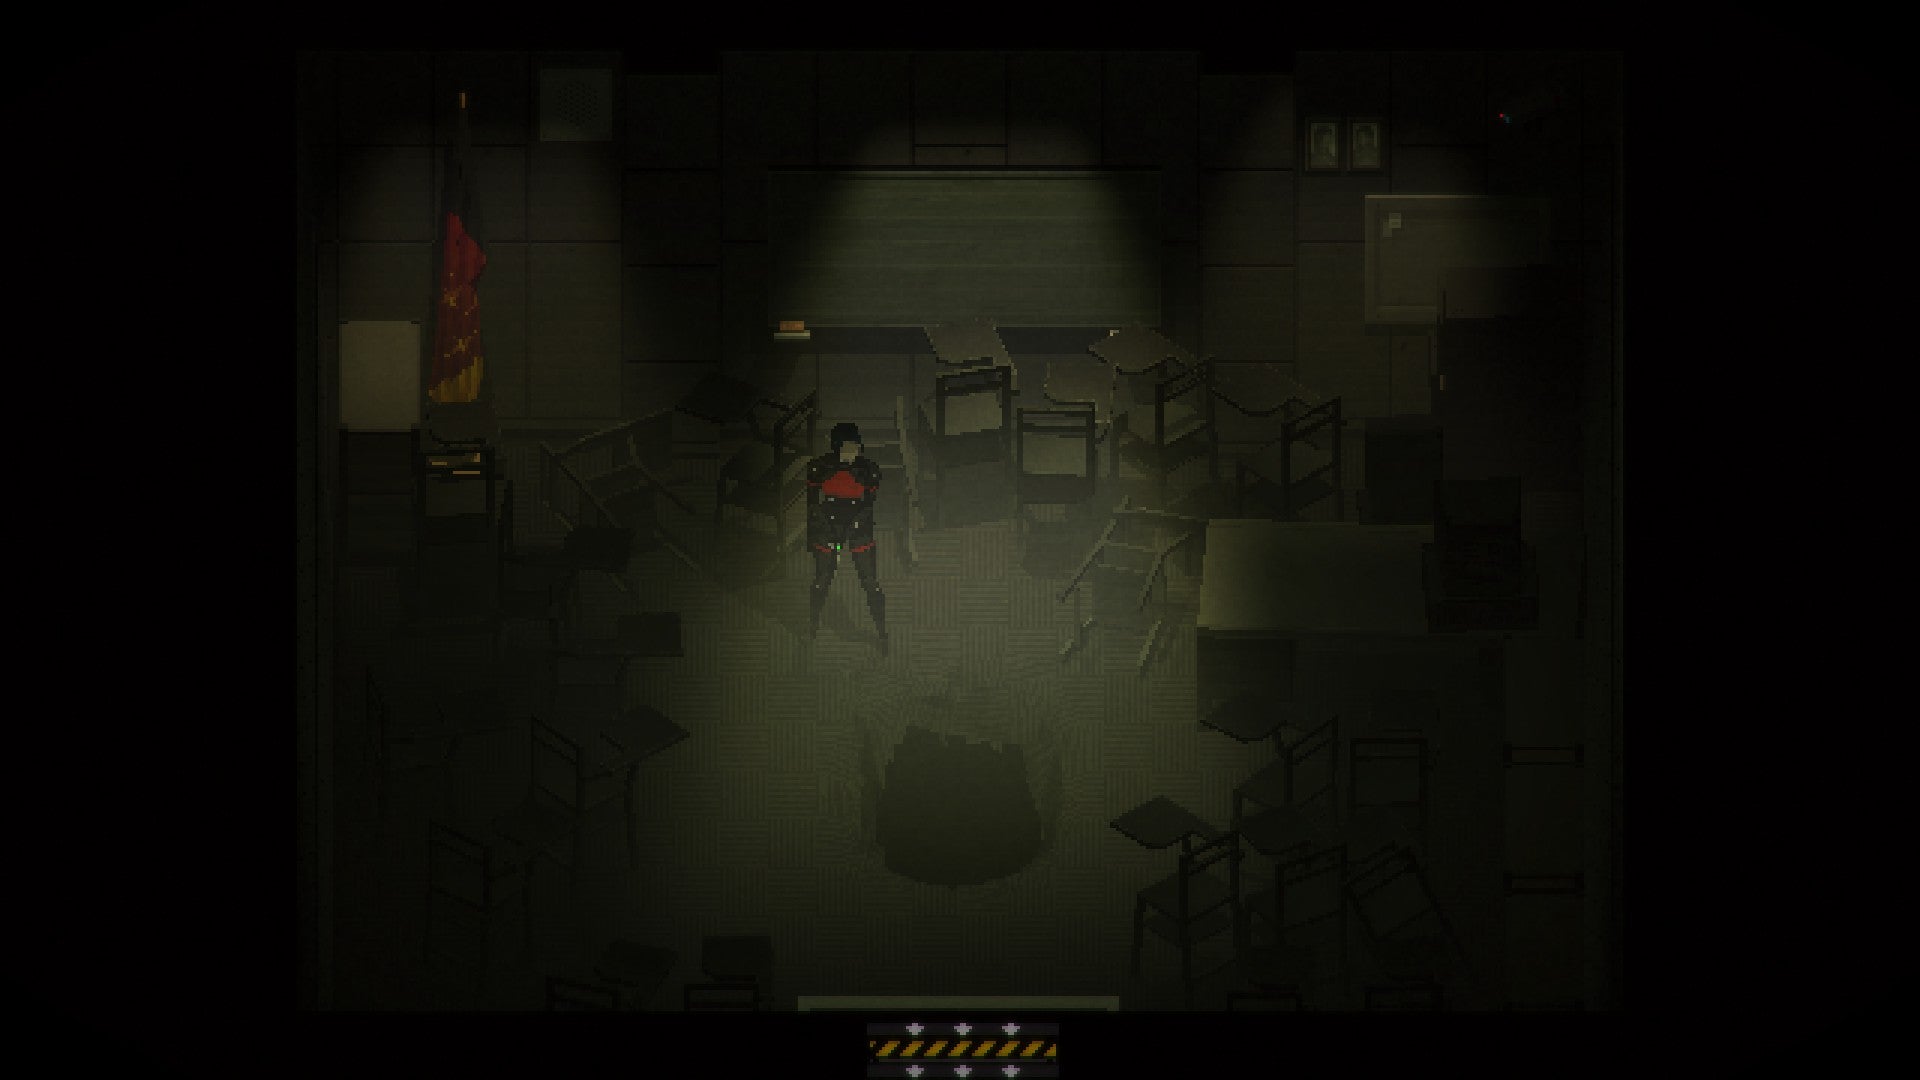 Signalis review - a dark, greenish-hued room with knocked over chairs and a black hole in the middle of the floor